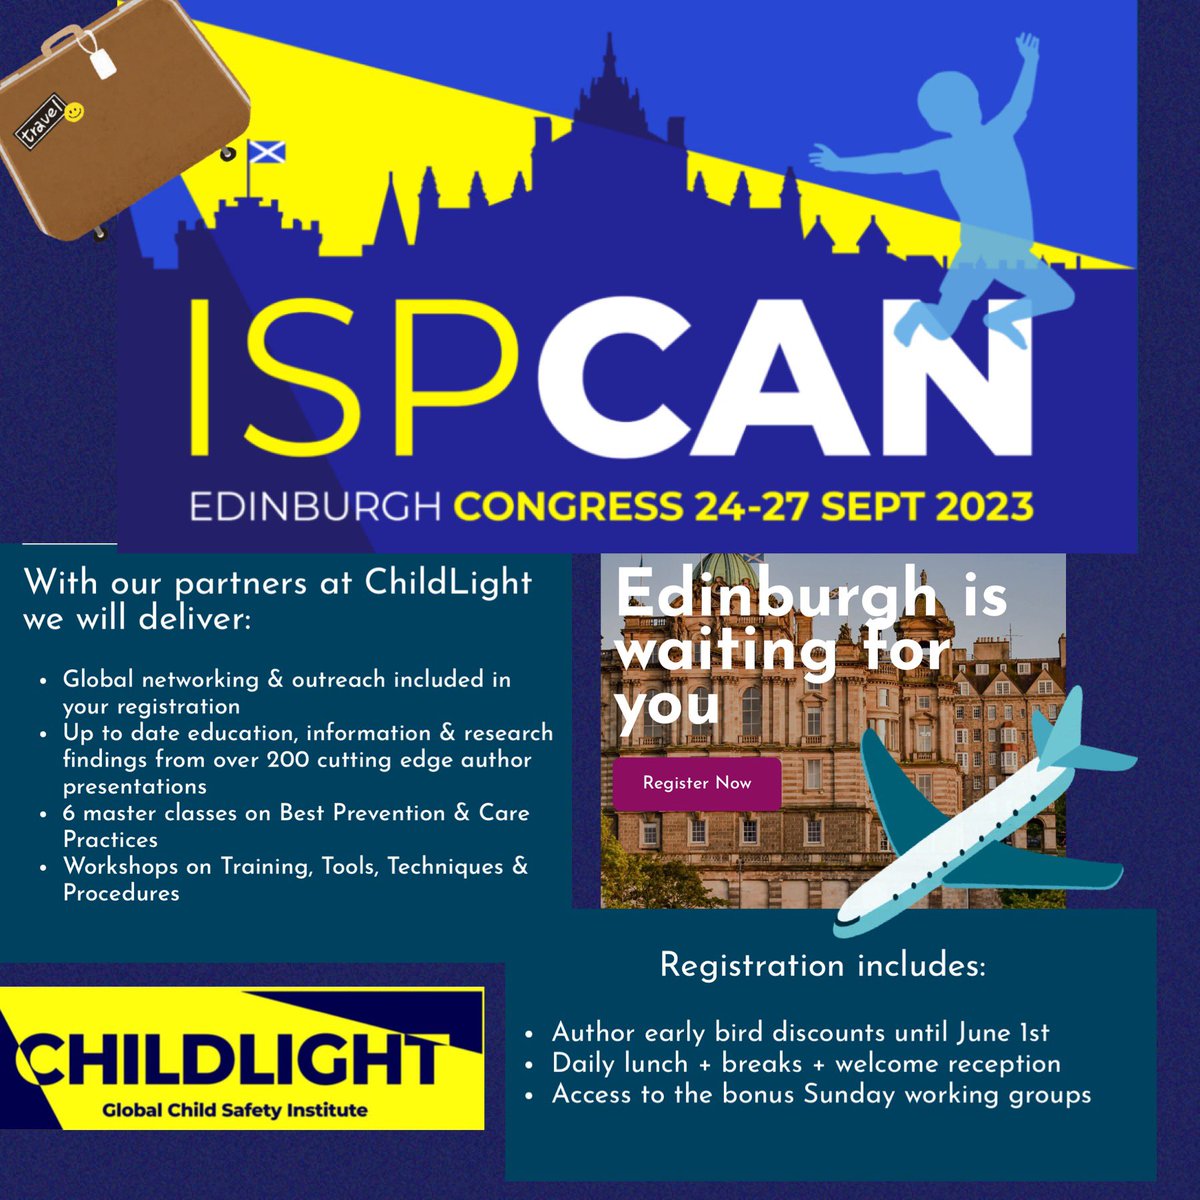 Pack your bags. Join us in Edinburgh for a one of a kind Congress bringing together global multidisciplinary professionals working in the prevention of child abuse & neglect. 
#riseuptoendchildabuse
#makingdatacount
#tacklingchildabuse  #ispcanedinburghcongress